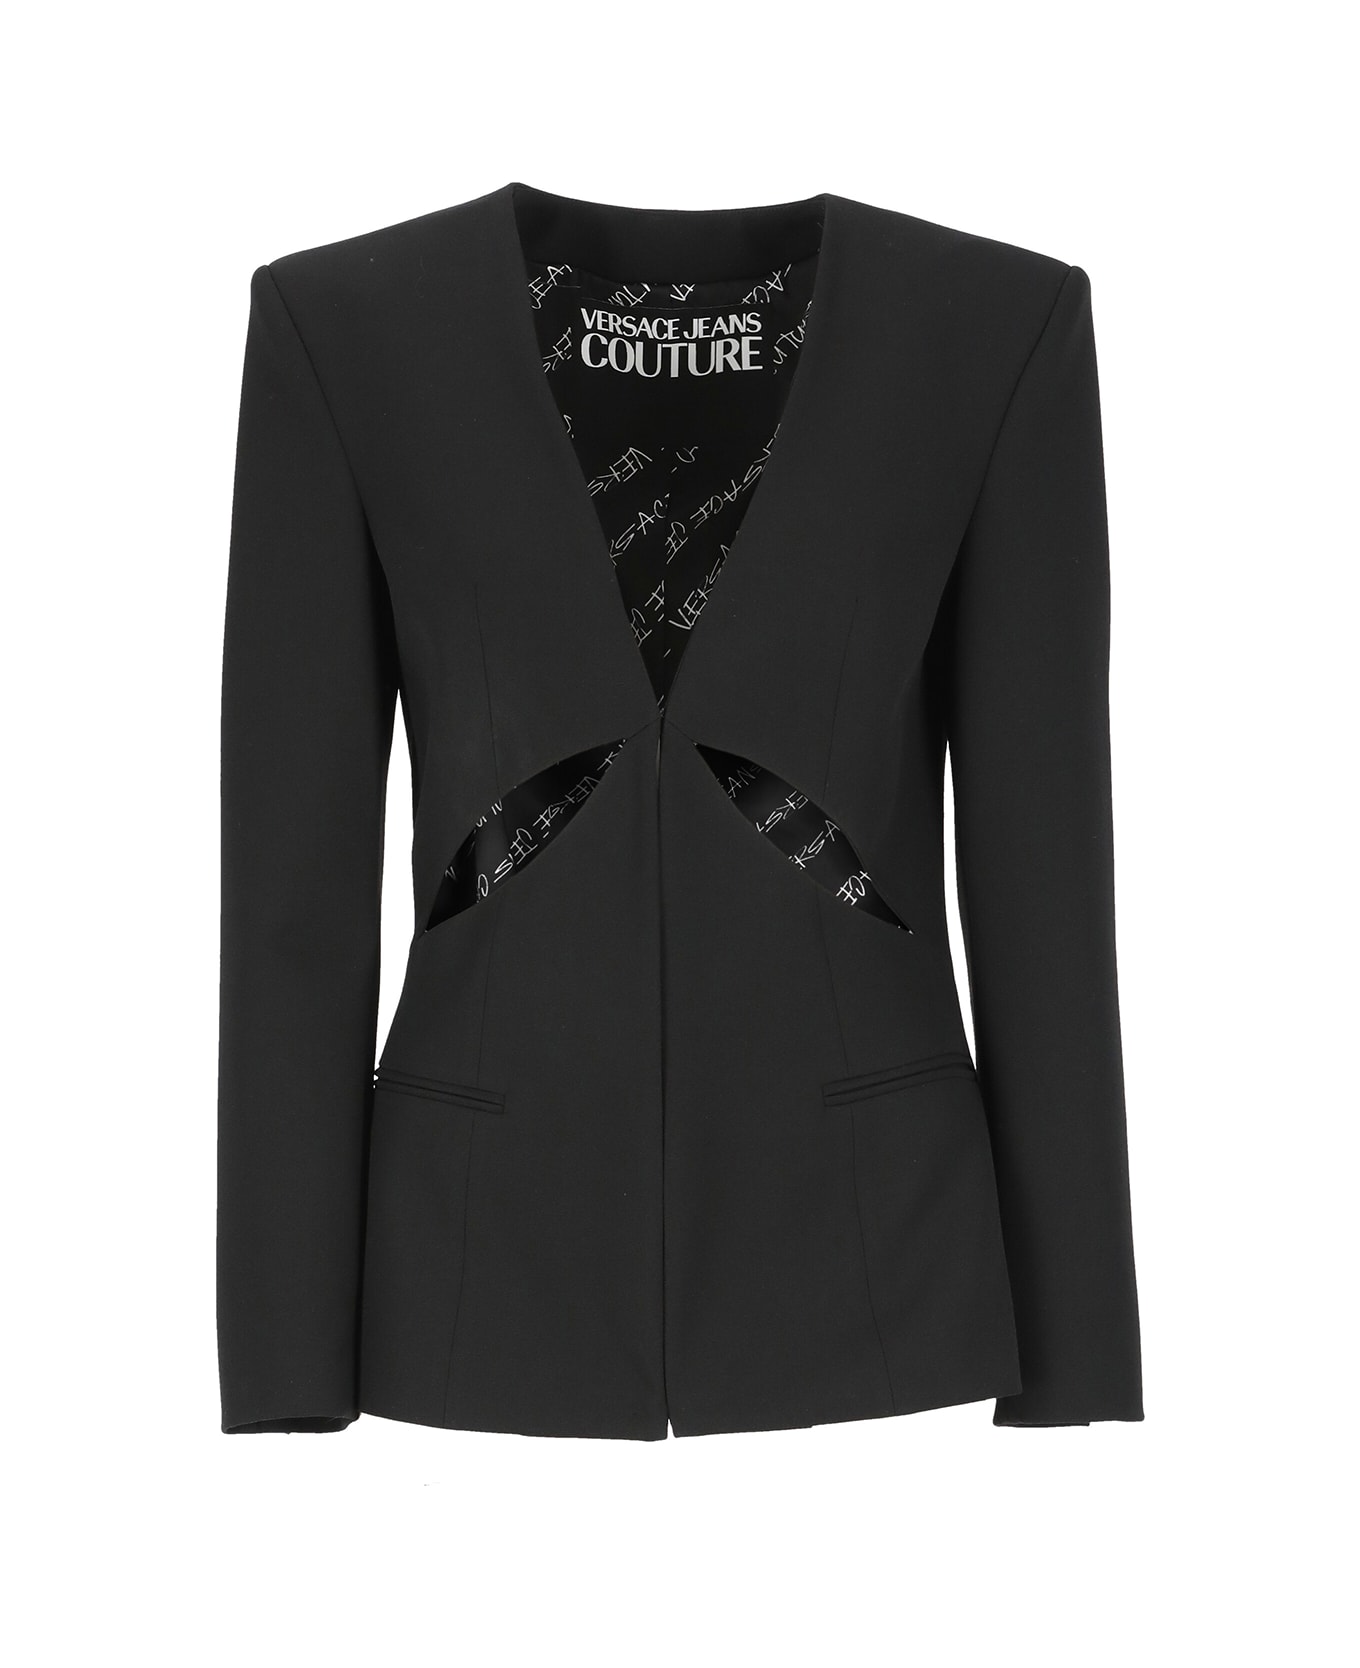 Versace Jeans Couture Blazer With Cut-out Details - Black